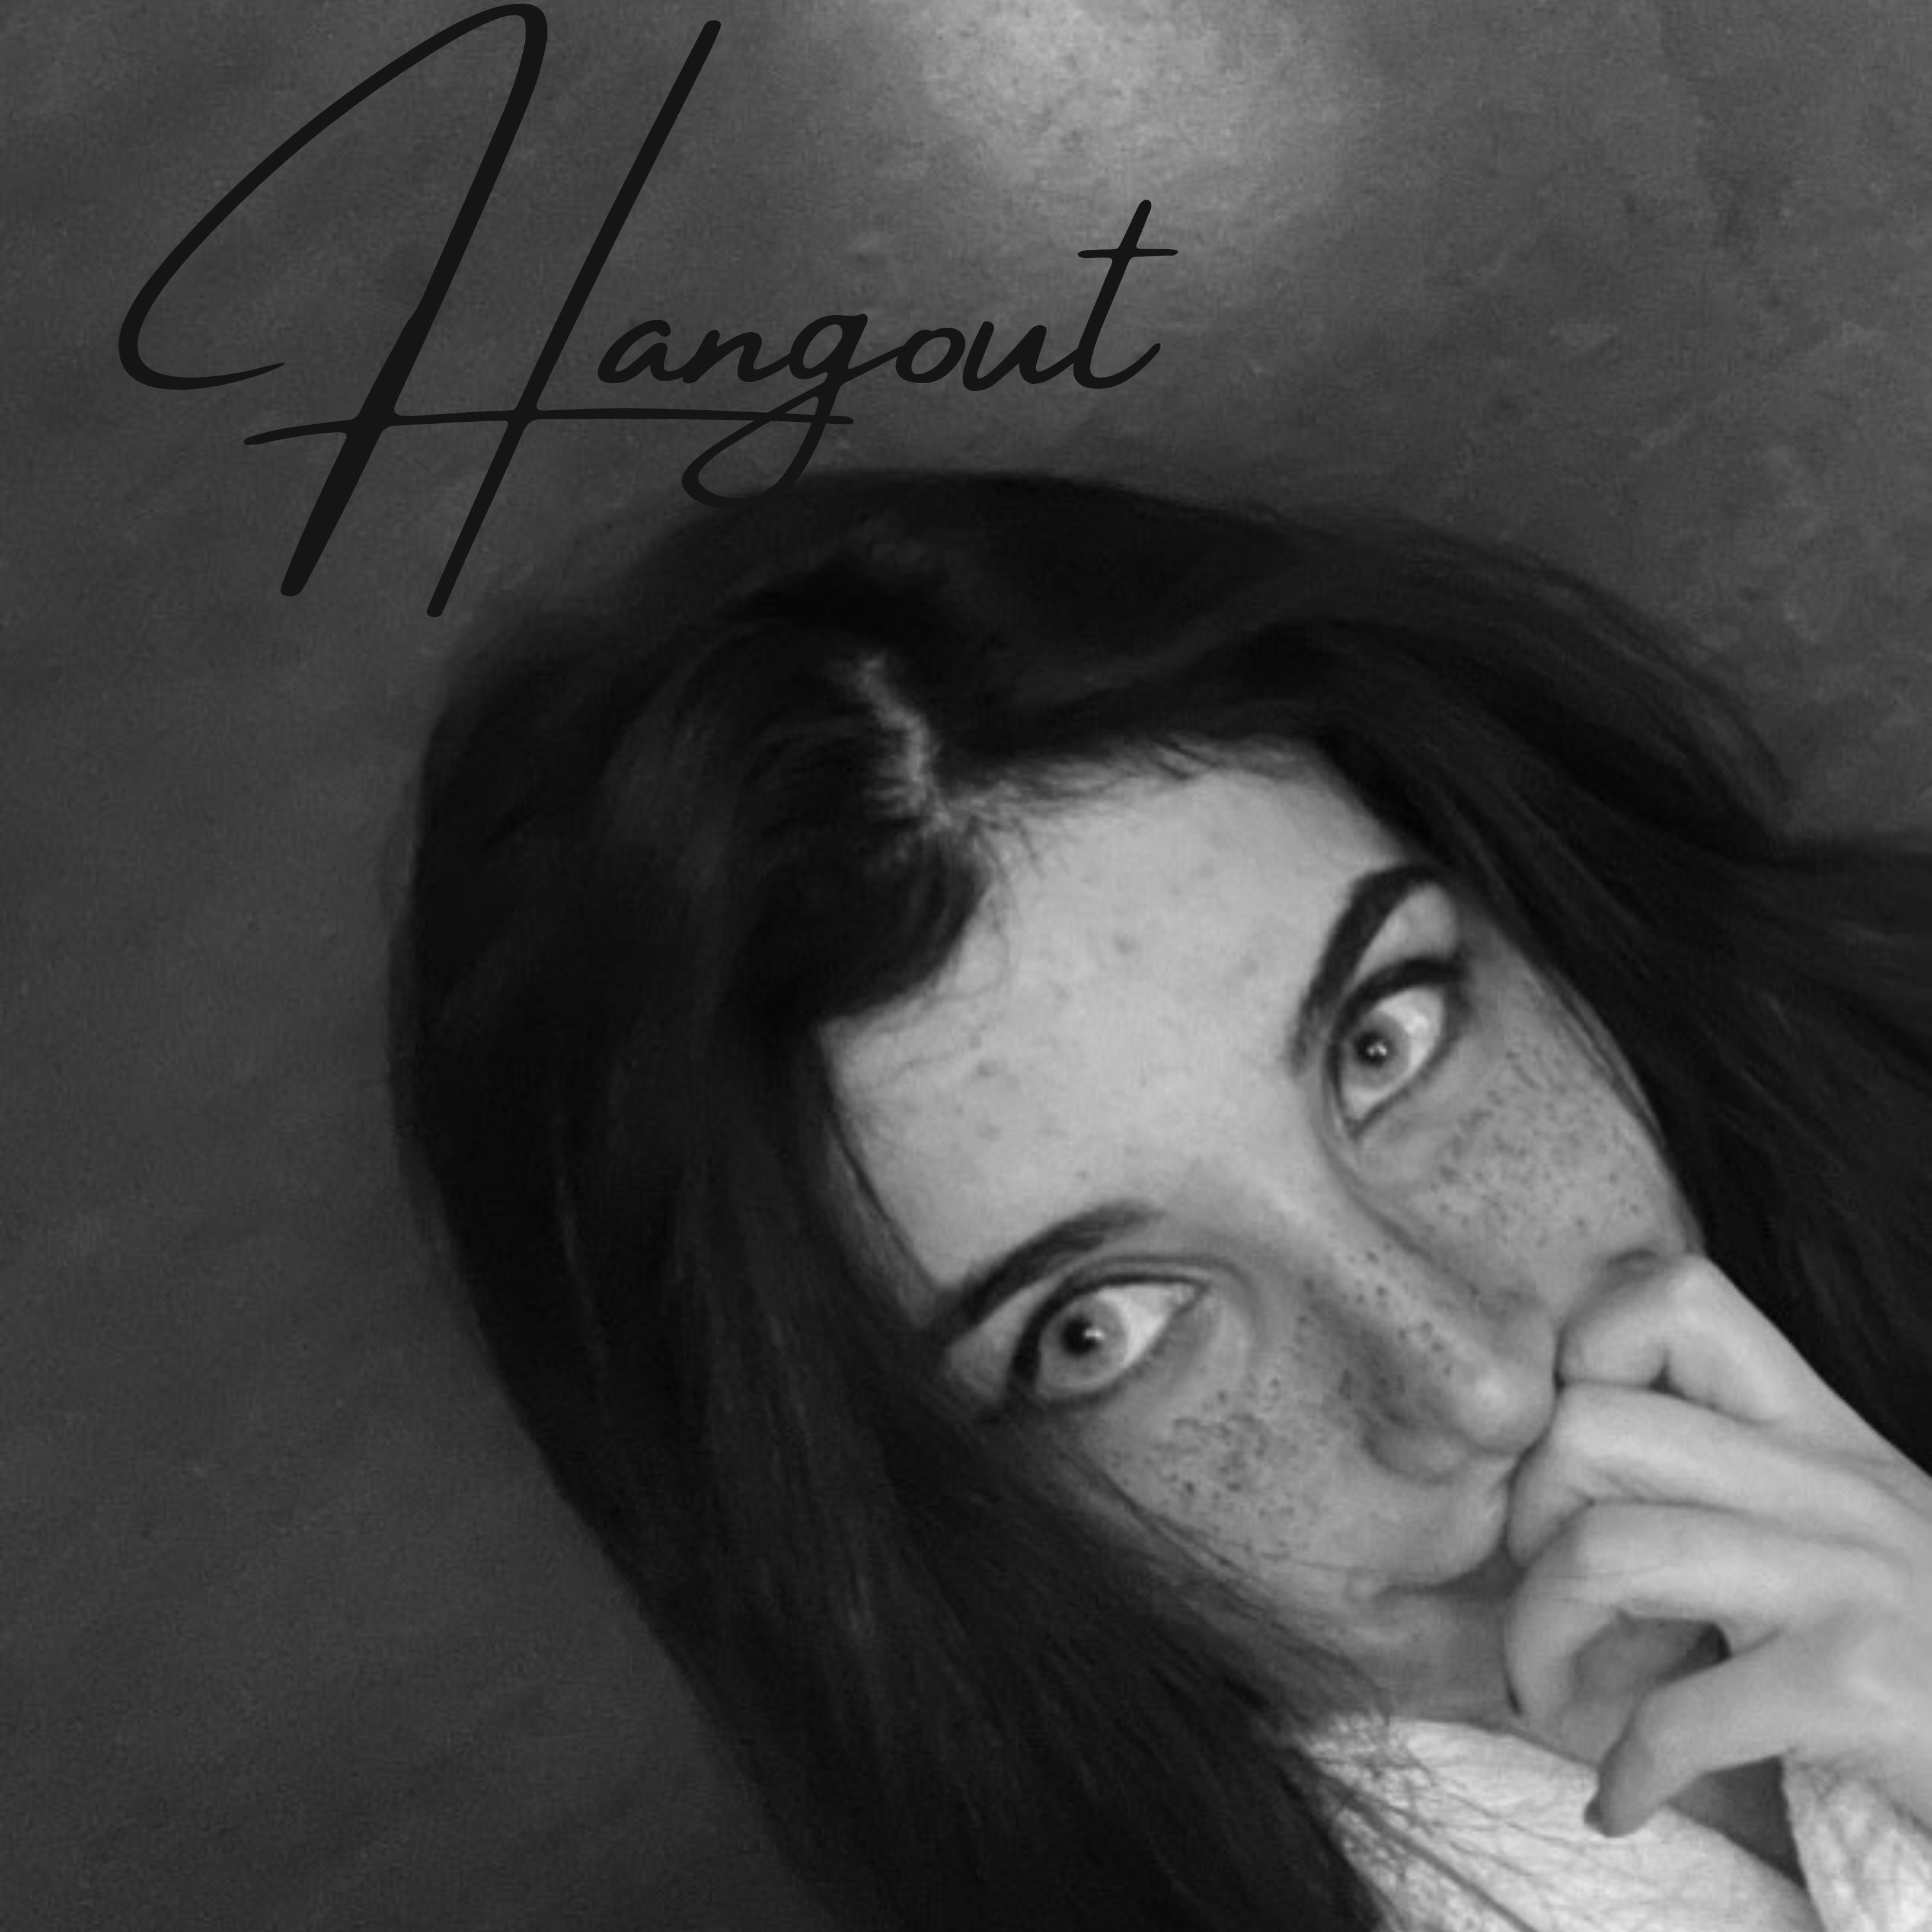 Hang out- A podcast by Christina